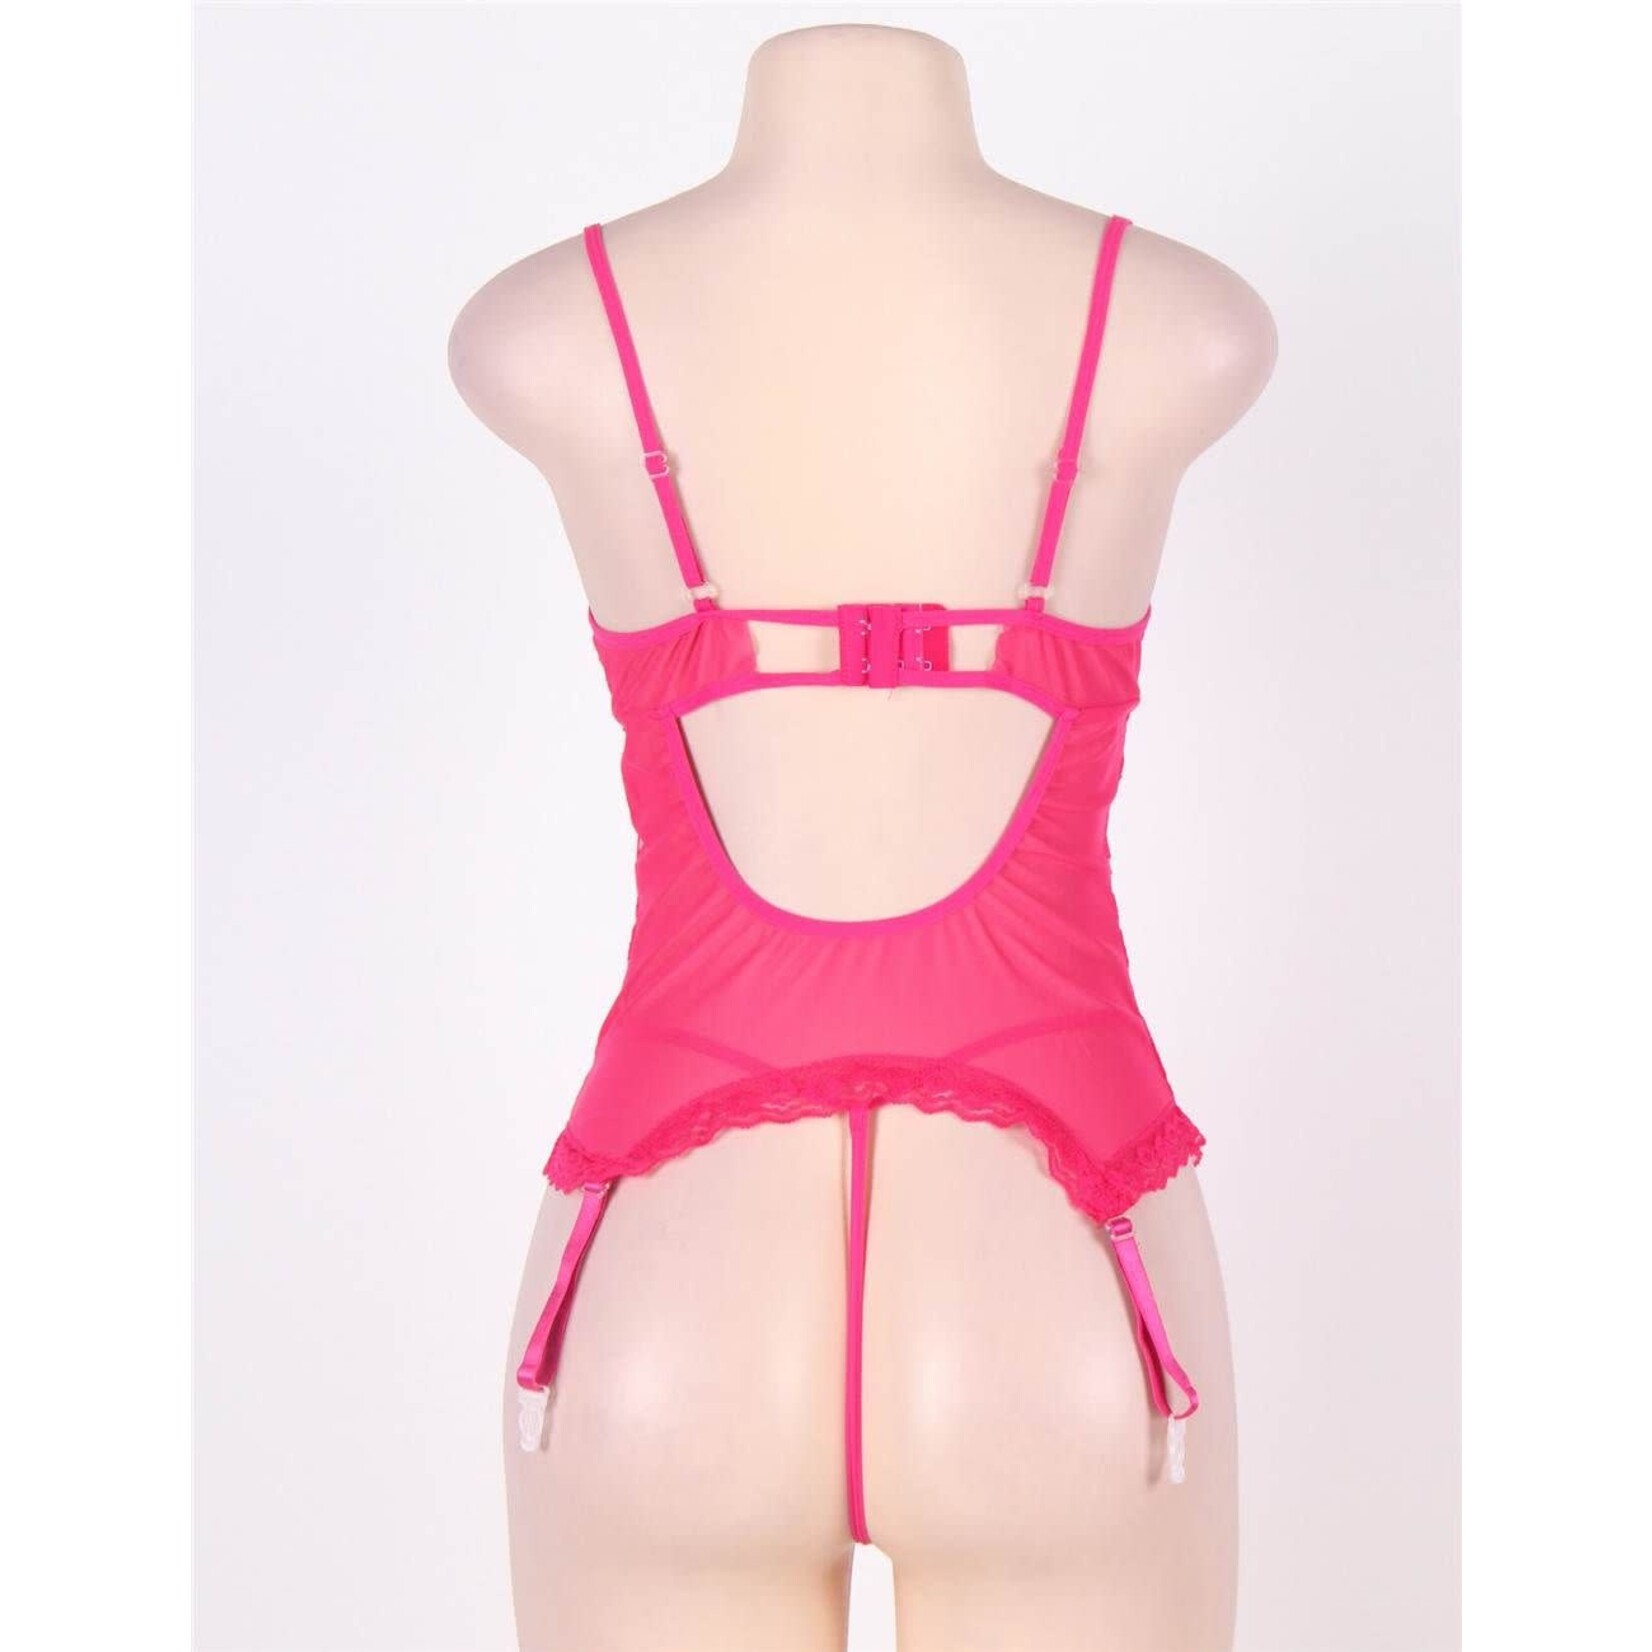 OH YEAH! -  PLUS SIZE ROSY OPEN BACK LACE TEDDY XL